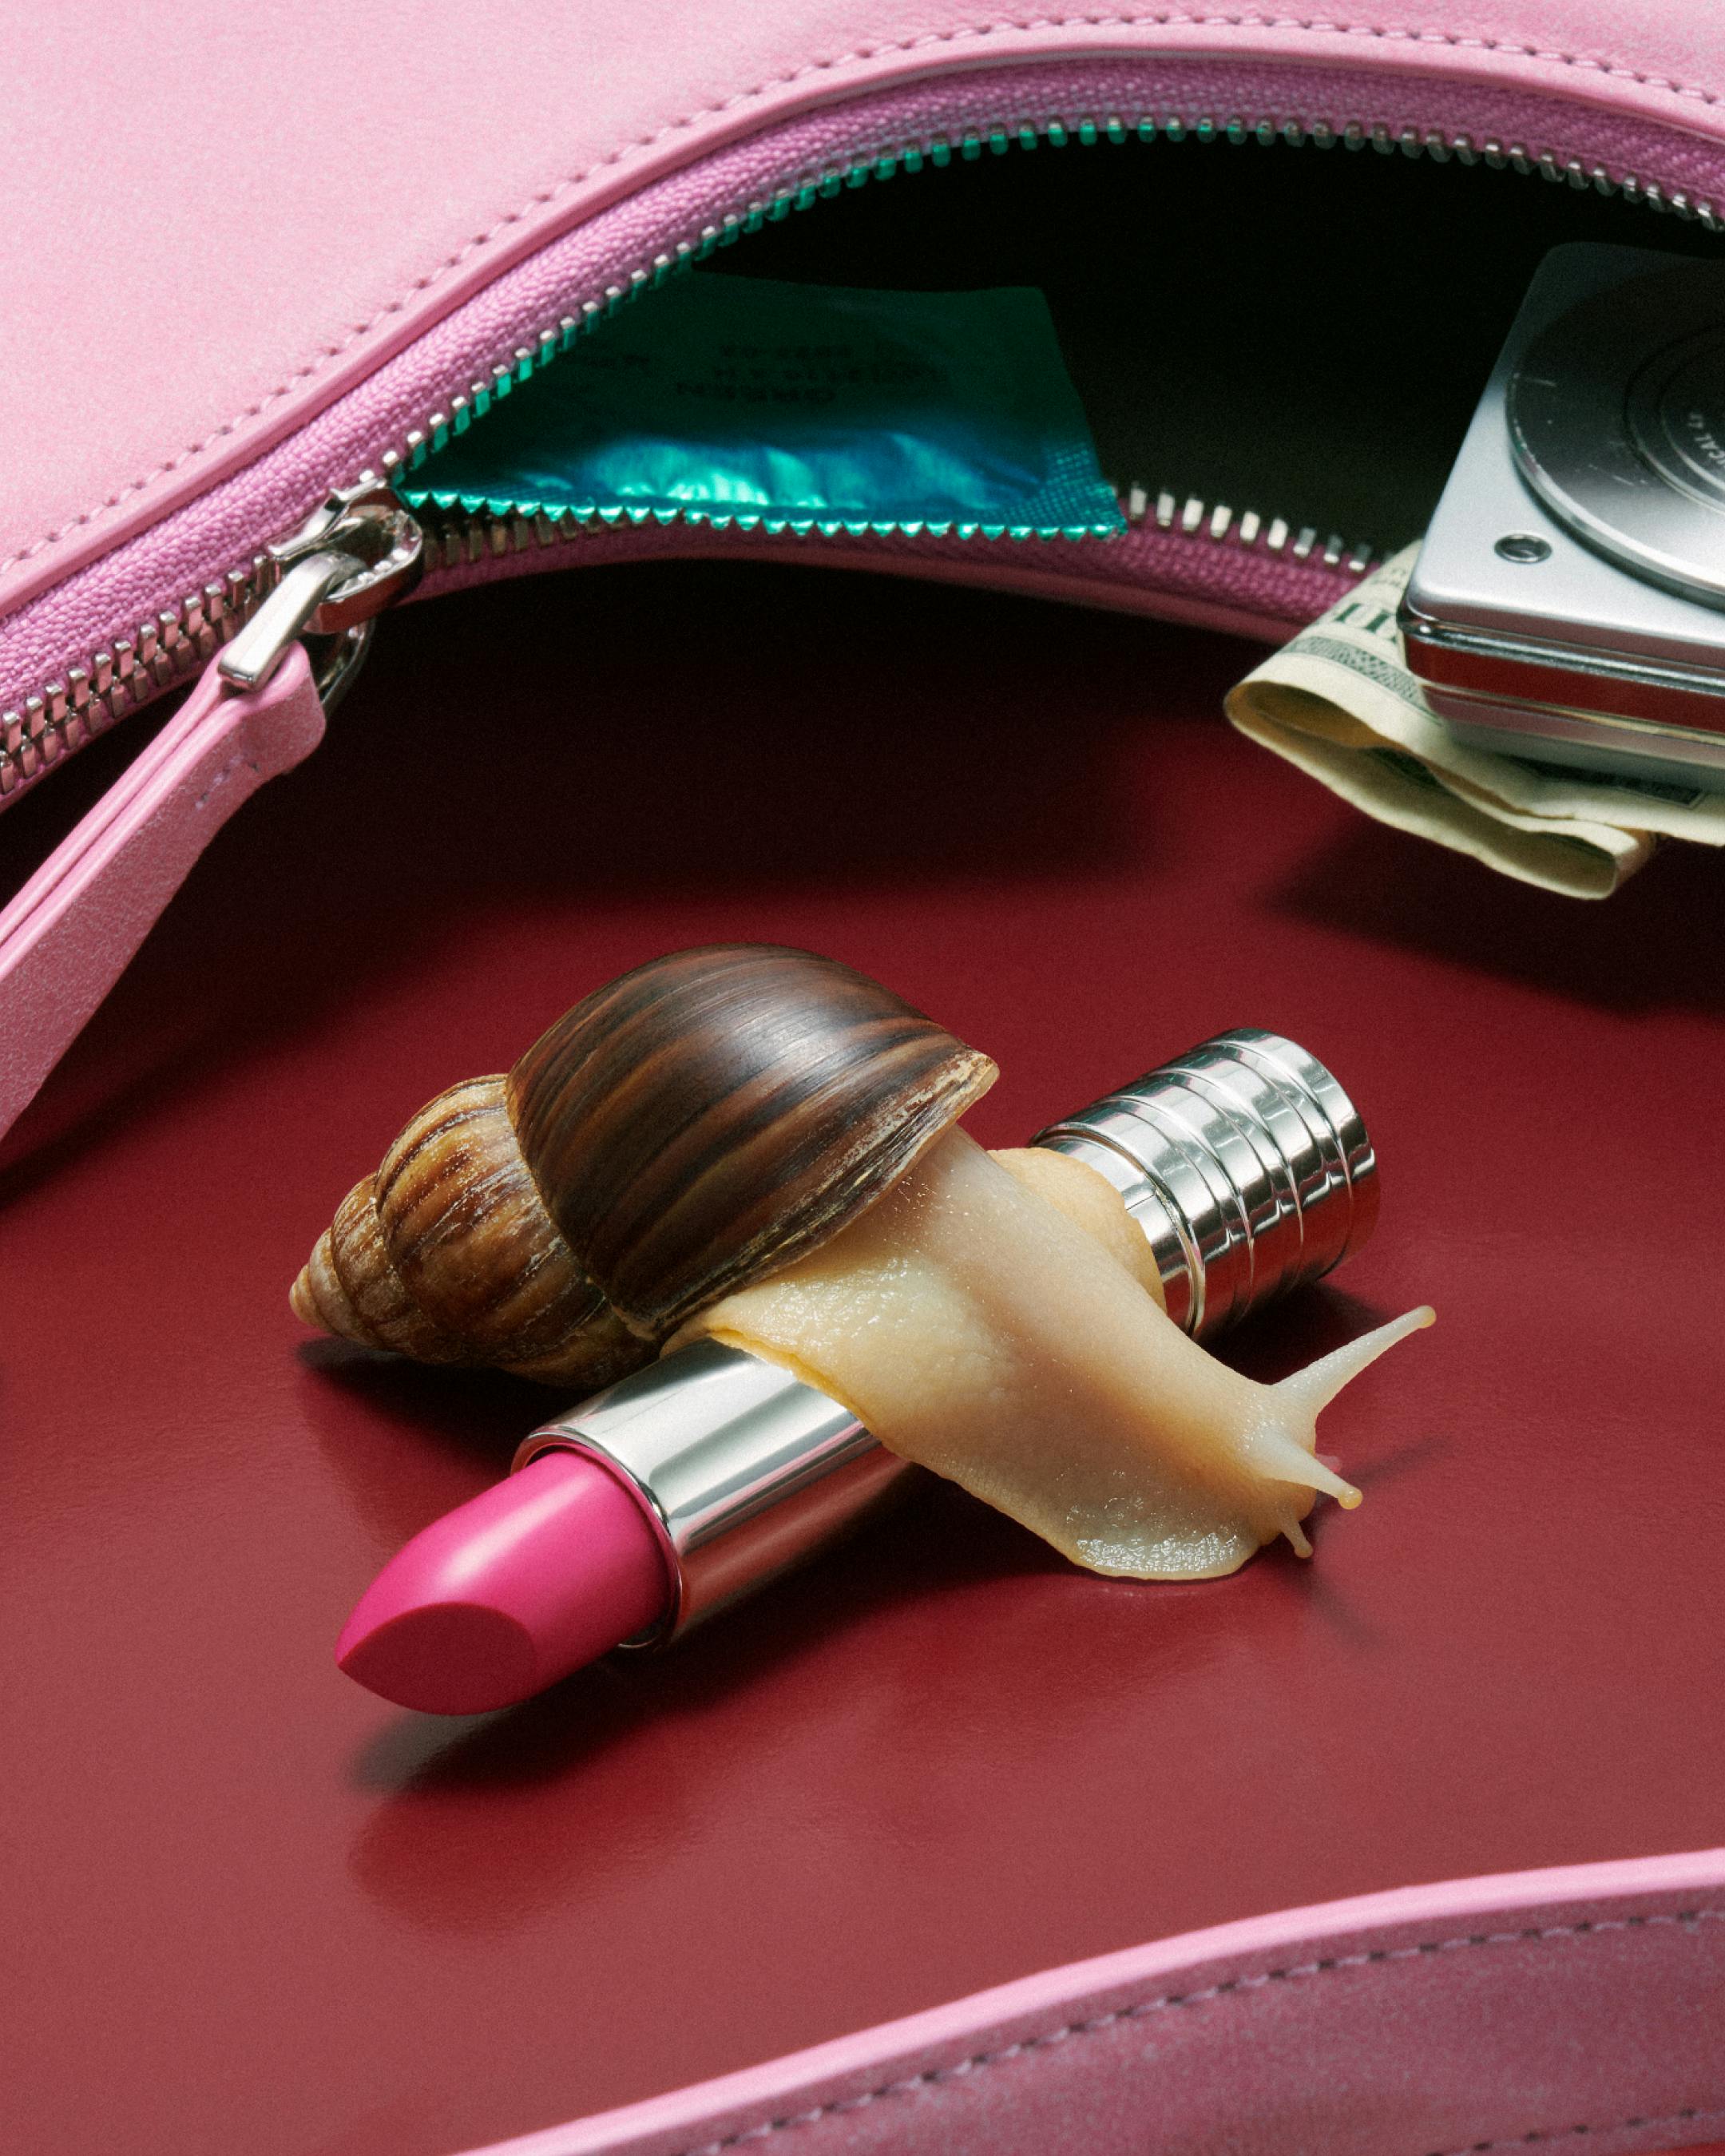 Snail on top of a pink lipstick